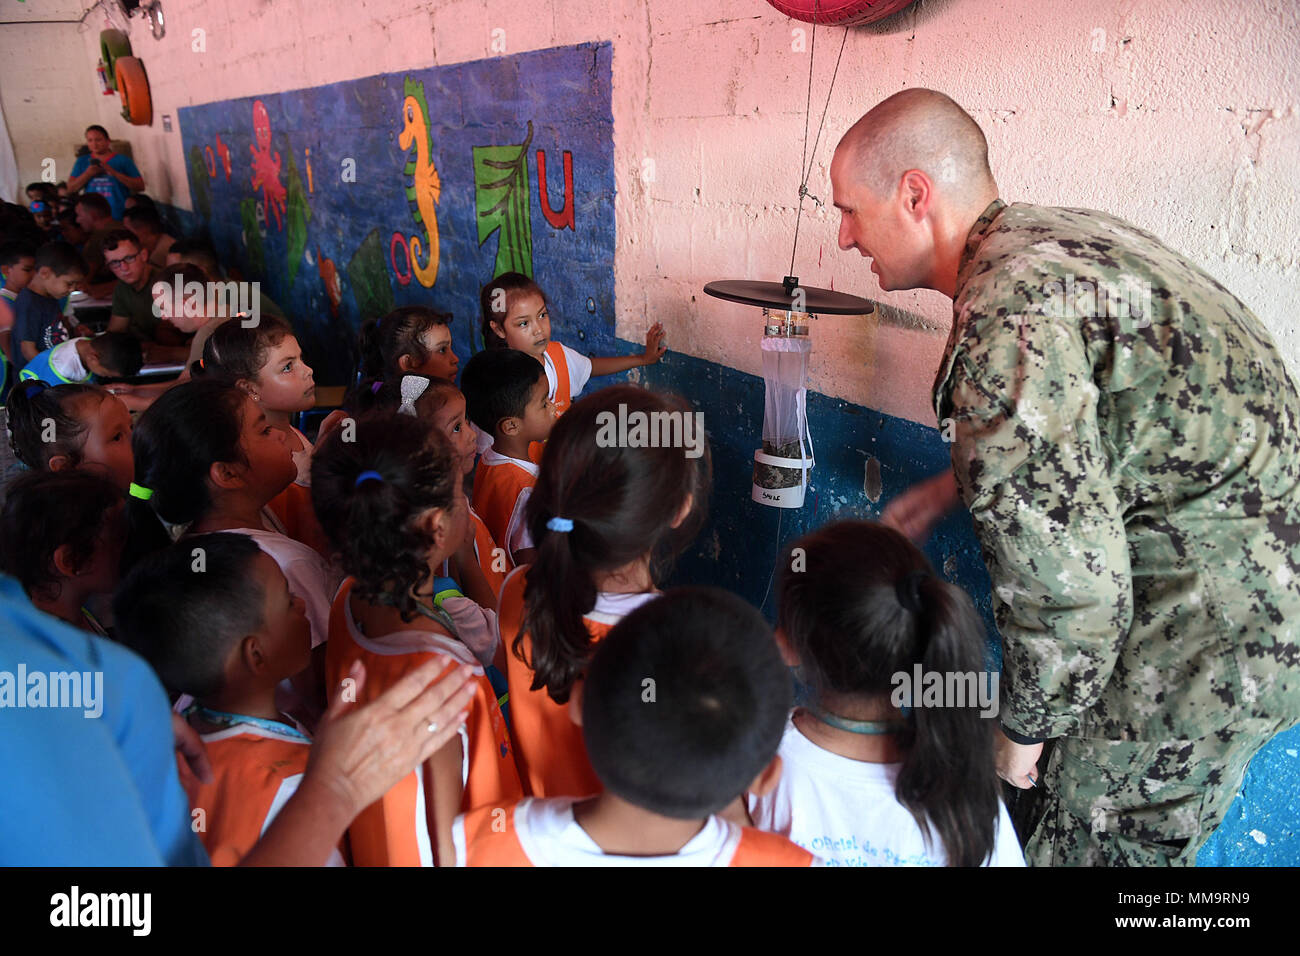 170922-N-BK435-0263 PUERTO BARRIOS, Guatemala (Sept. 22, 2017) Lt. Cmdr. Ian Sutherland, technical director for the Navy Entomology Center of Excellence, shows students a mosquito trap at Escuela Natalia Corriz Viuda de Morales, a Guatemalan primary school, during a Southern Partnership Station 17 community relations project (COMREL). SPS 17 is a U.S. Navy deployment executed by U.S. Naval Forces Southern Command/U.S. 4th Fleet, focused on subject matter expert exchanges with partner nation militaries and security forces in Central and South America. (U.S. Navy photo by Mass Communication Spec Stock Photo